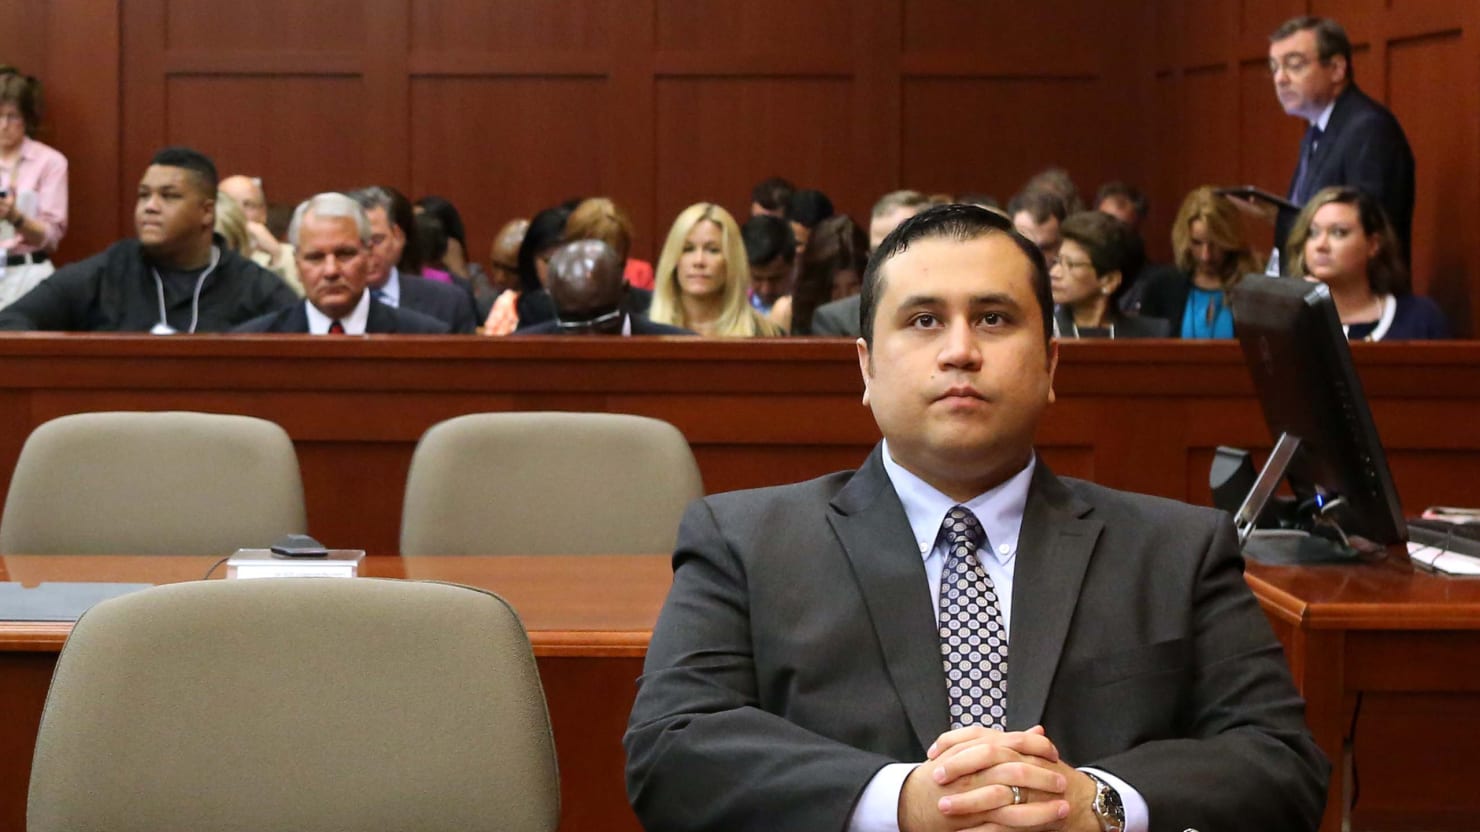 George Zimmerman Trial, Day One: ‘F--king Punks’